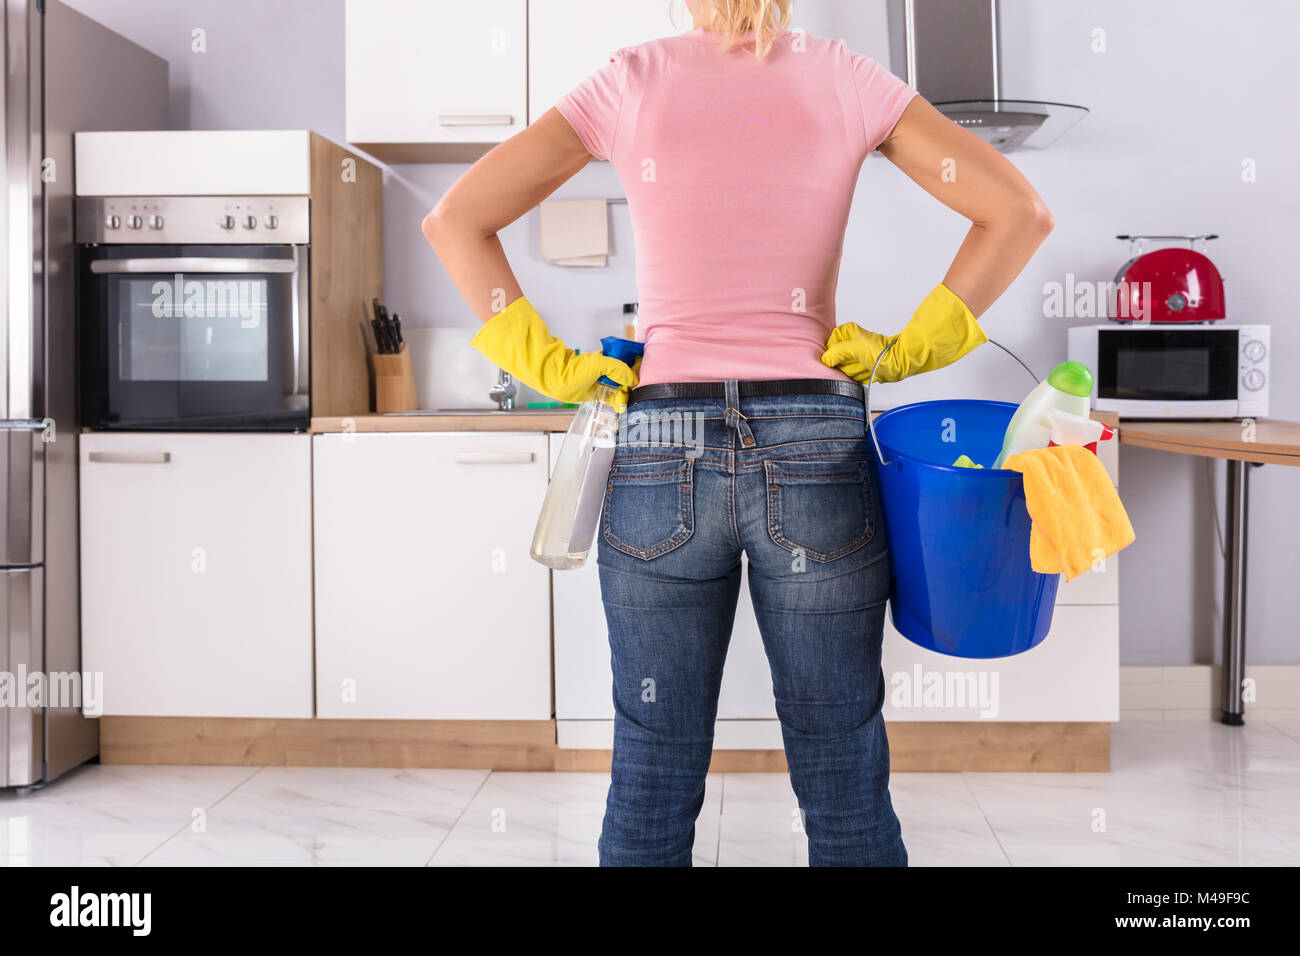 Rear View Of Woman Holding Cleaning Tools And Products In Bucket At Kitchen Stock Photo